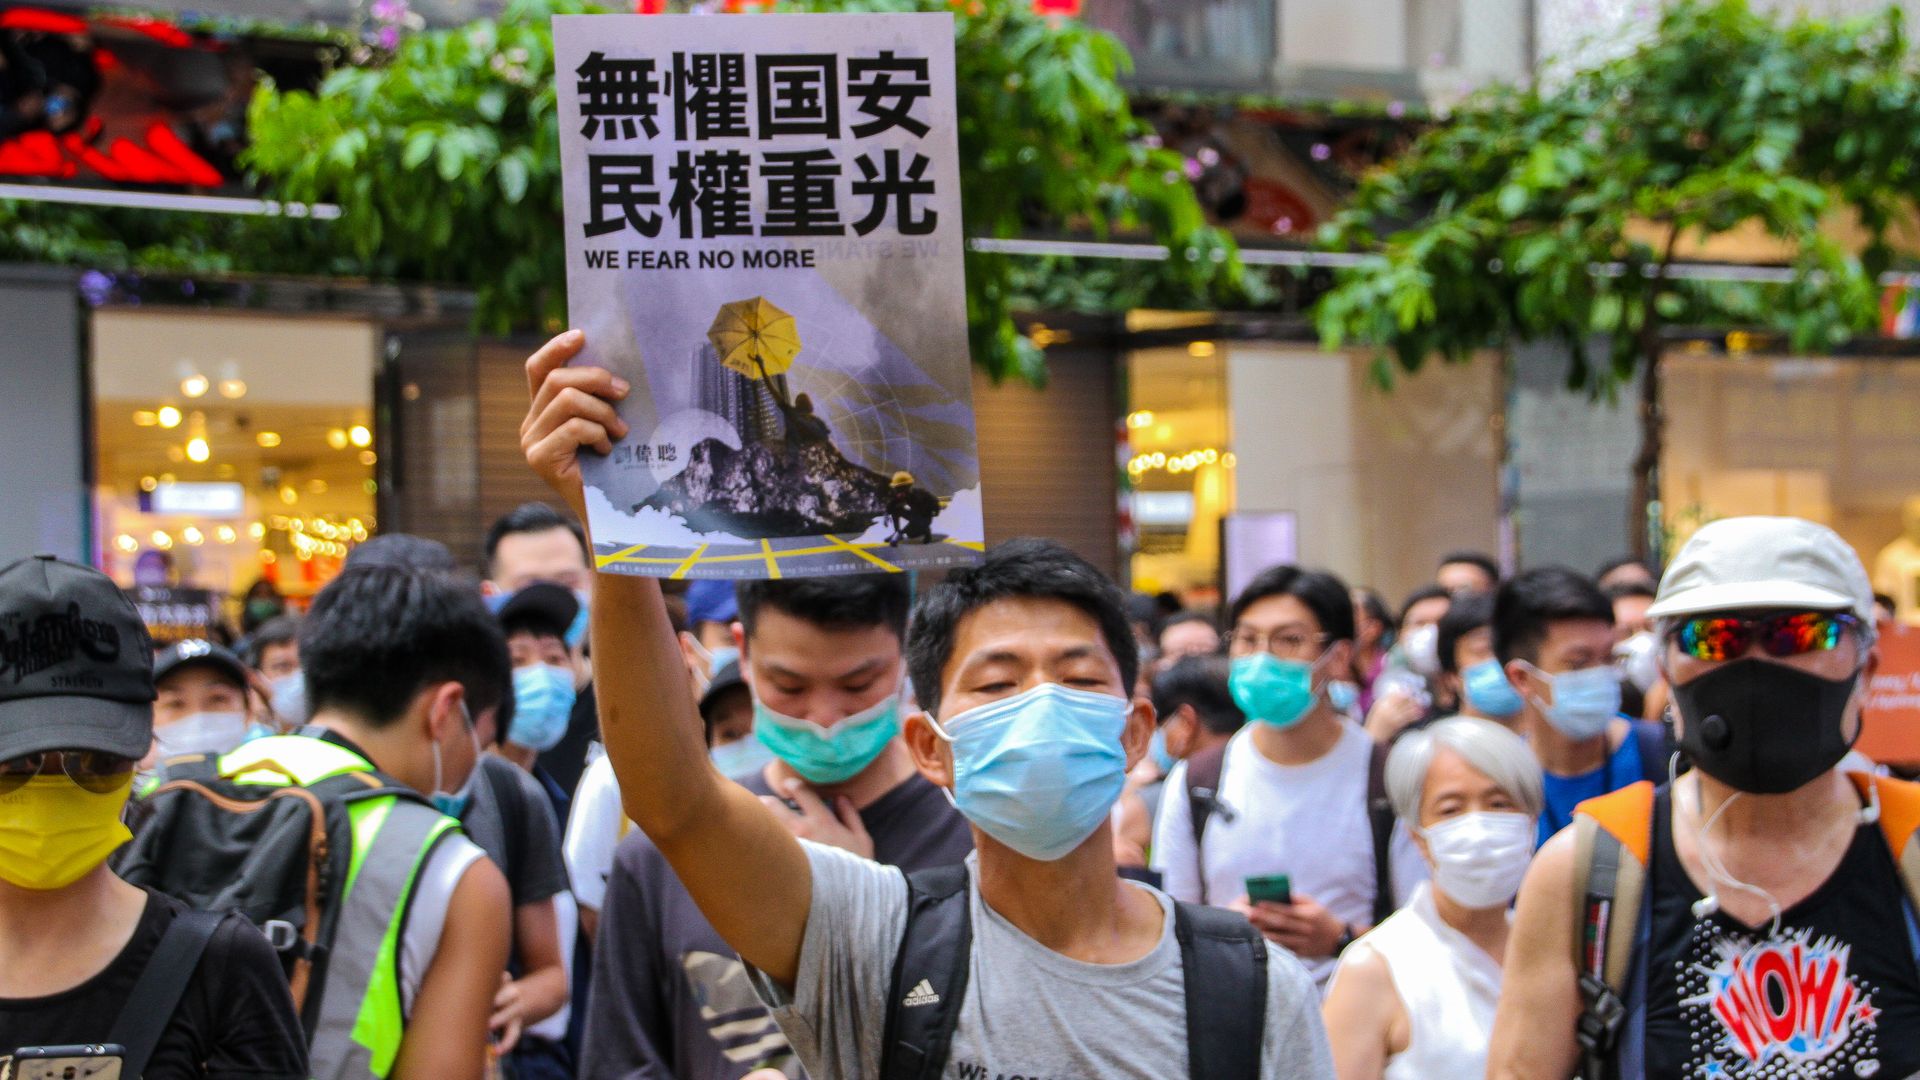 Pro-democracy protesters during a demonstration on July 1, 2020.